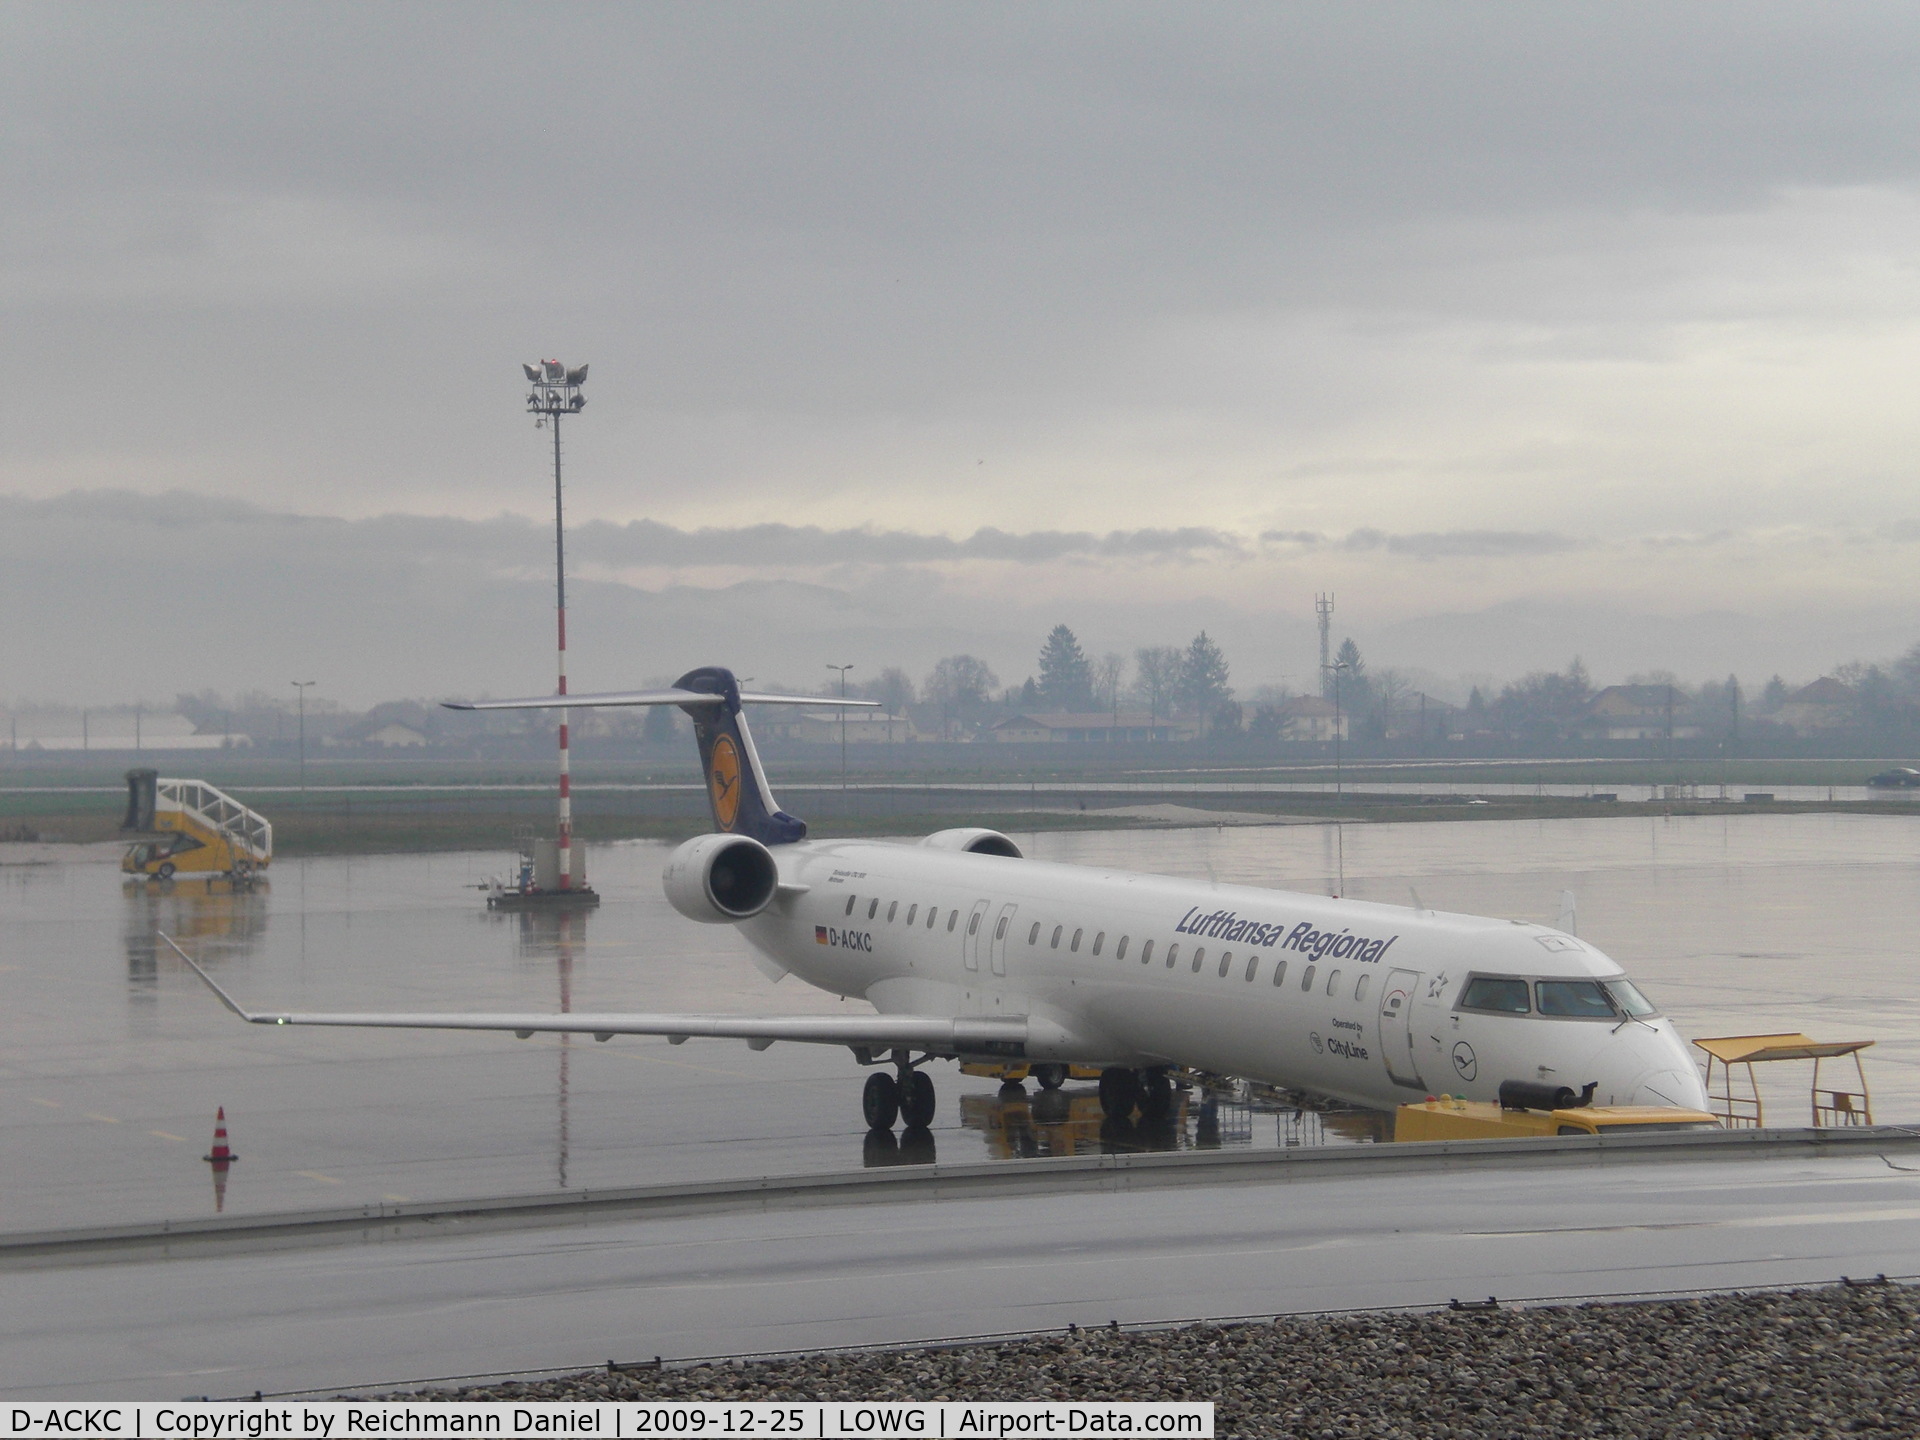 D-ACKC, 2006 Bombardier CRJ-900LR (CL-600-2D24) C/N 15078, Sorry for that ground staff...